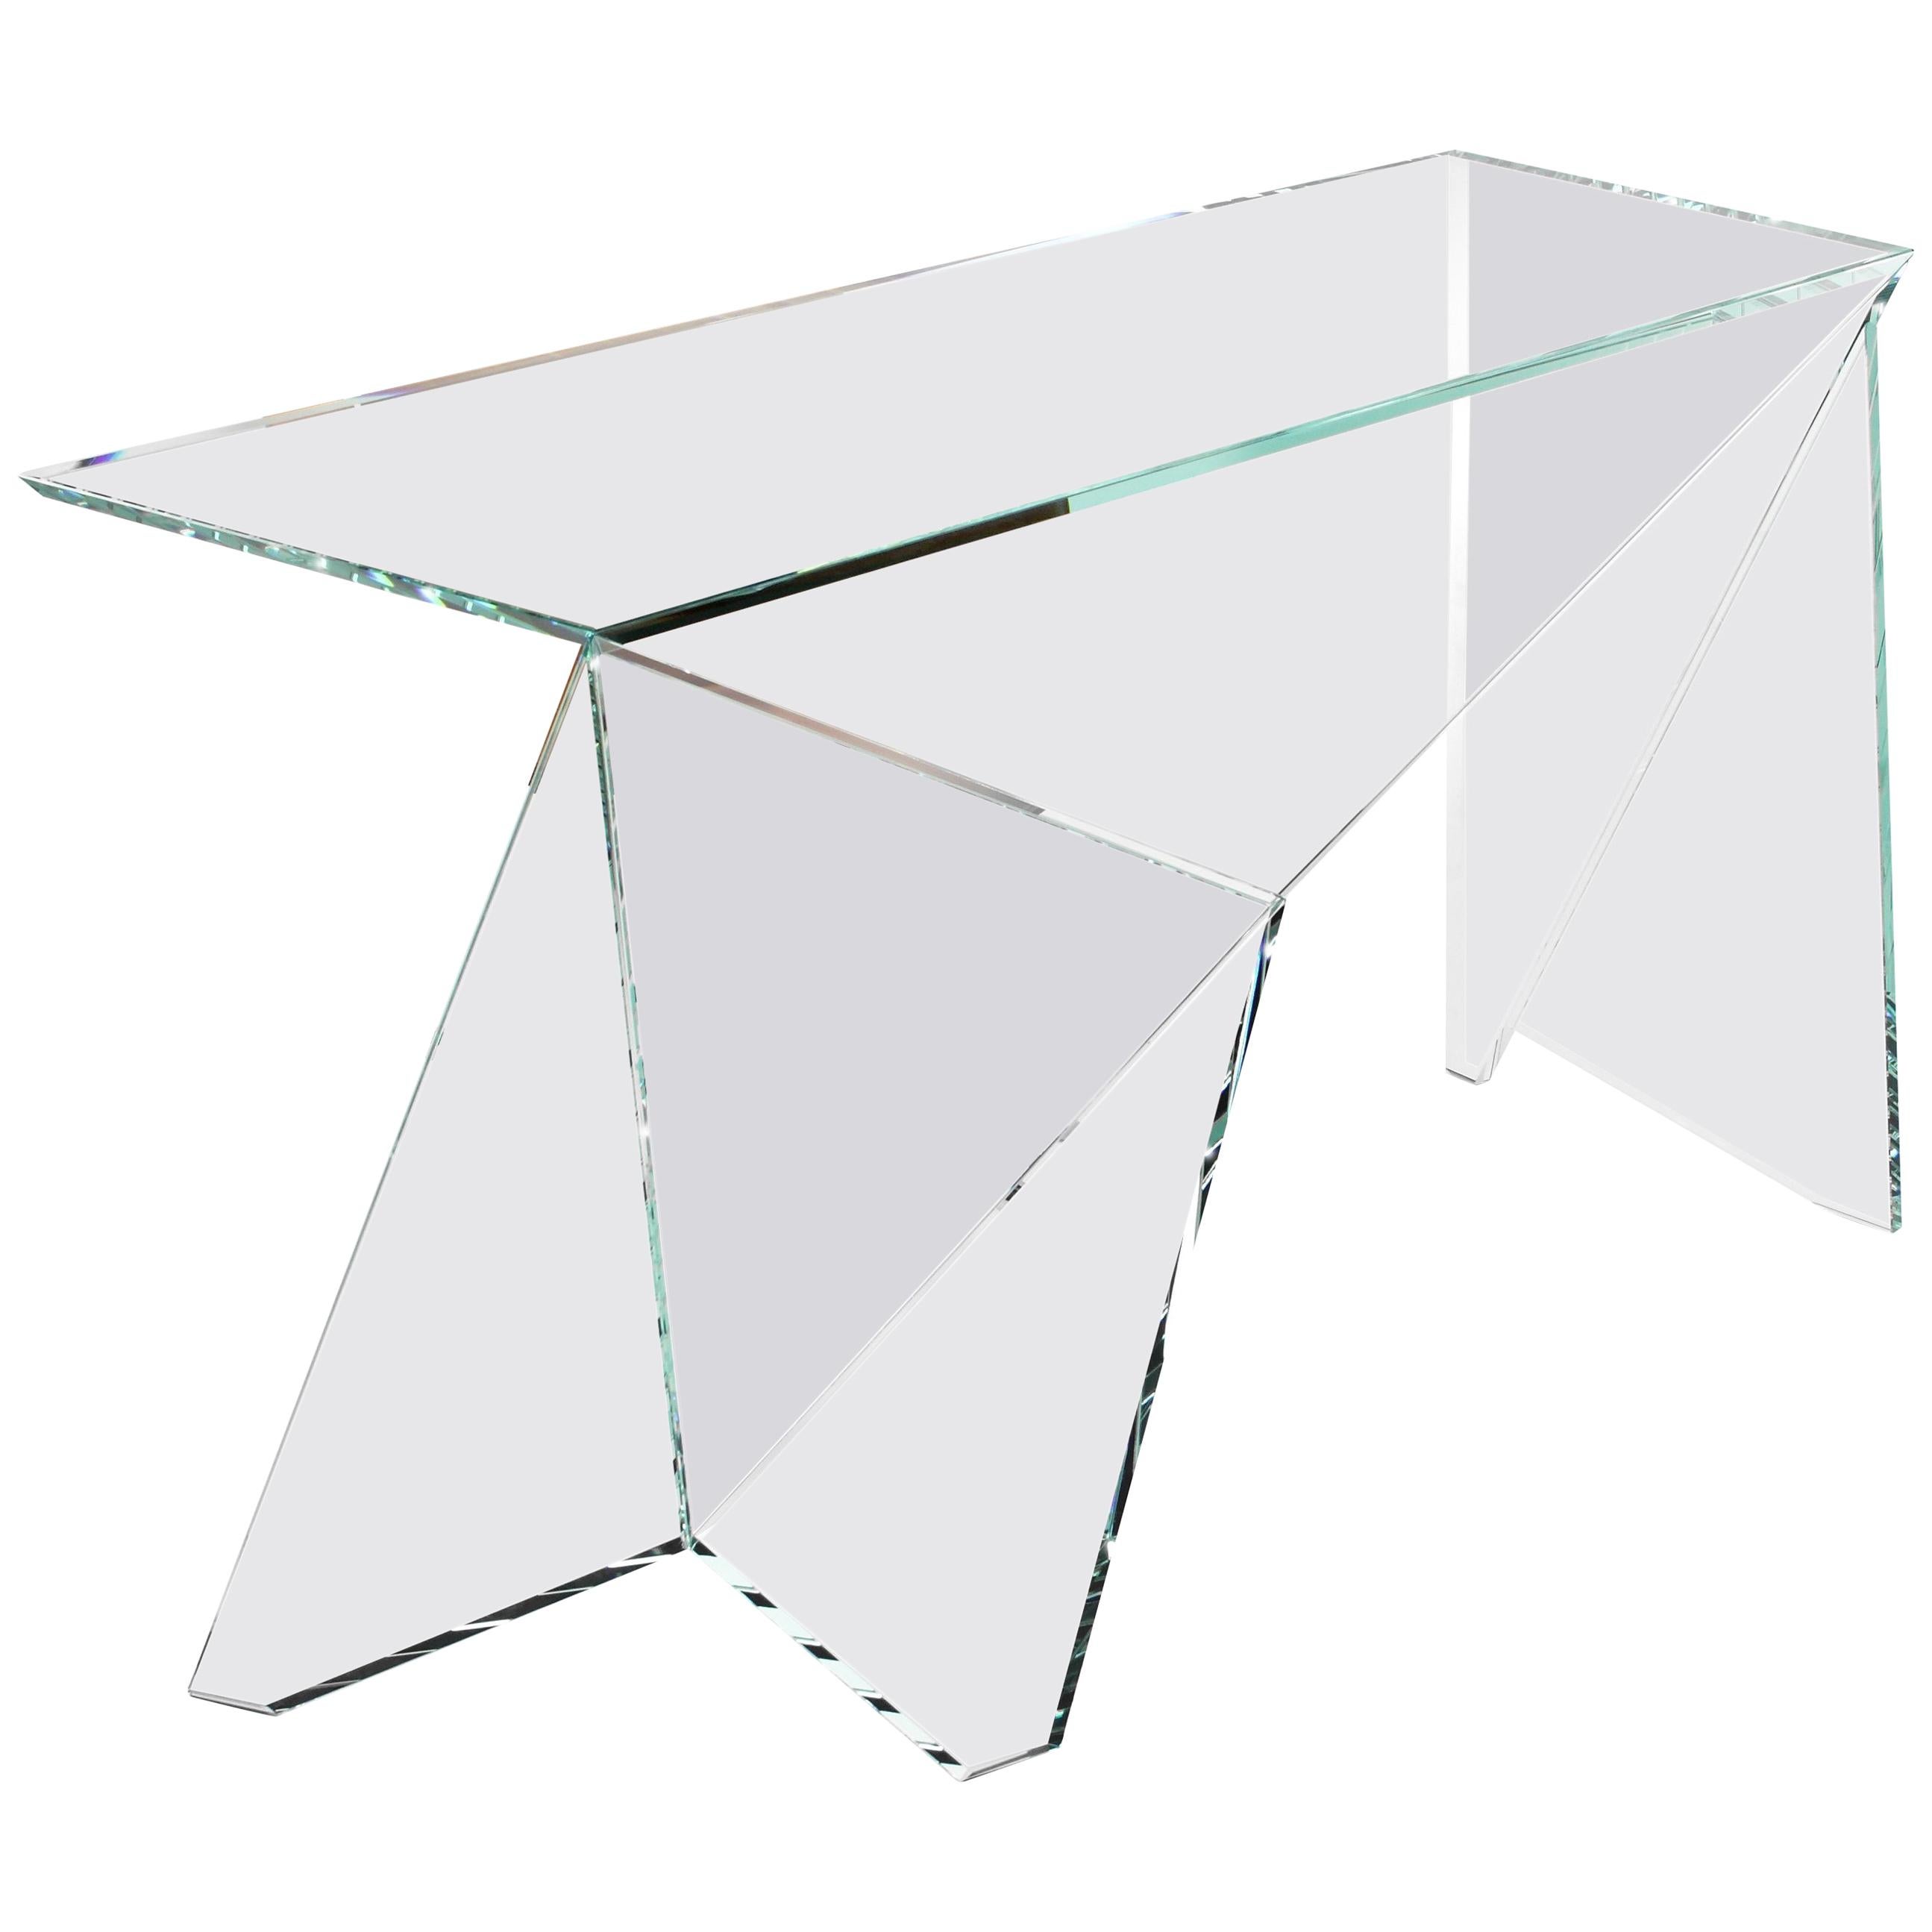 Desk or Writing Table Crystal Glass Origami Design Collectible Made in Italy